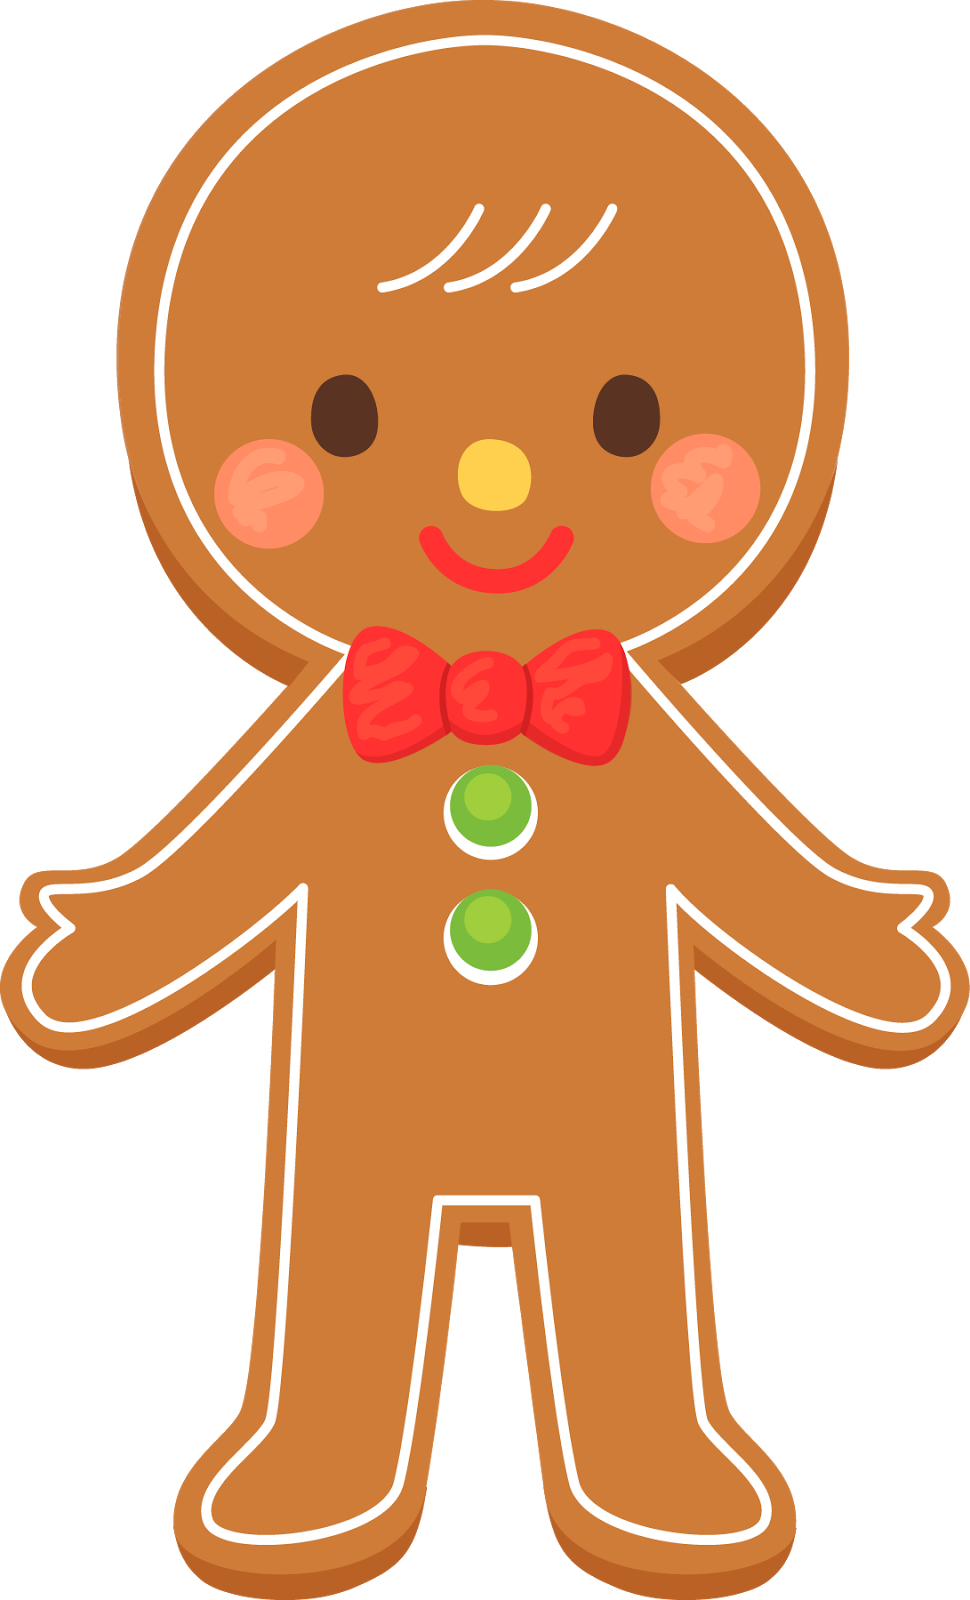 Gingerbread house clip art the cliparts